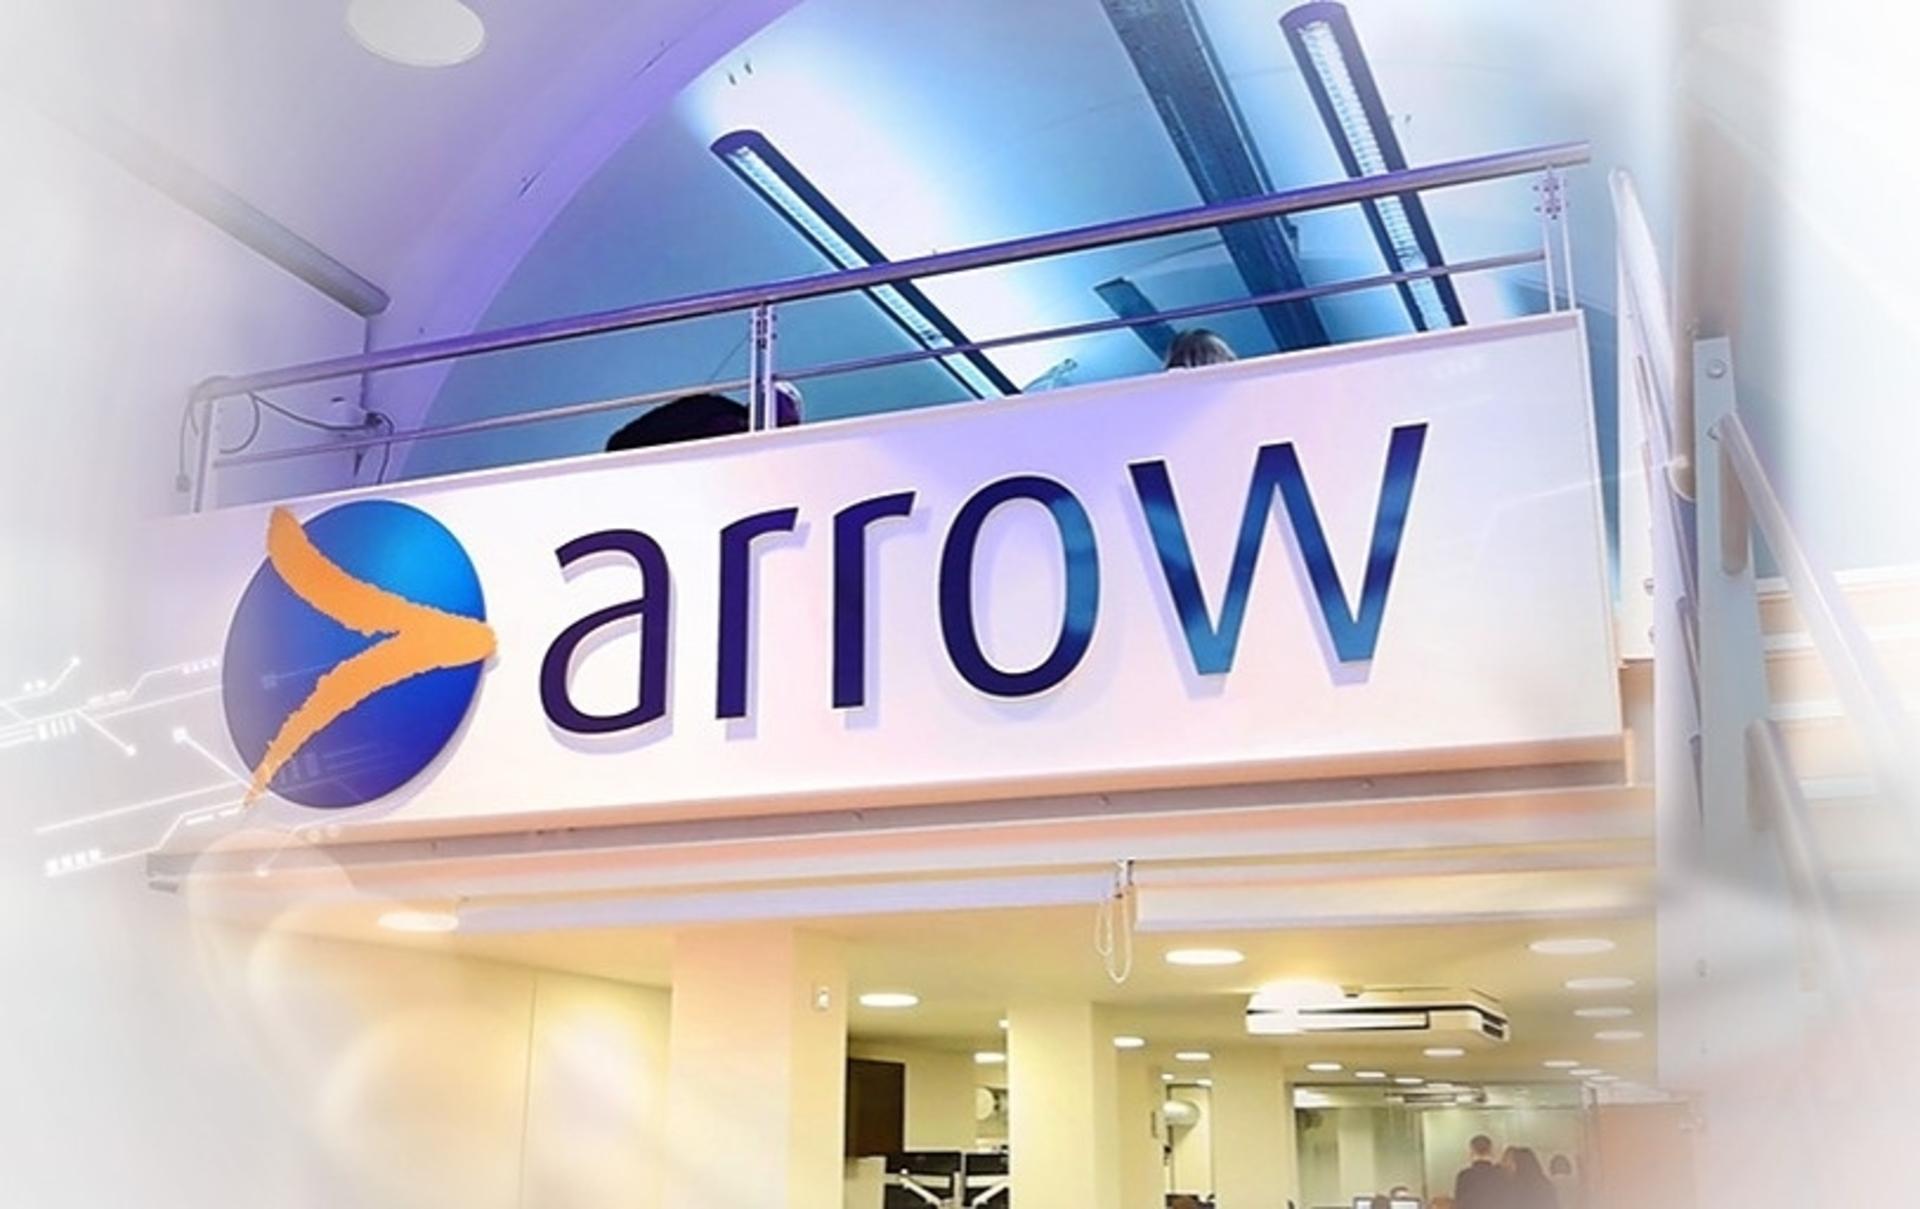 Arrow Business Communications makes fourth acquisition since PE investment